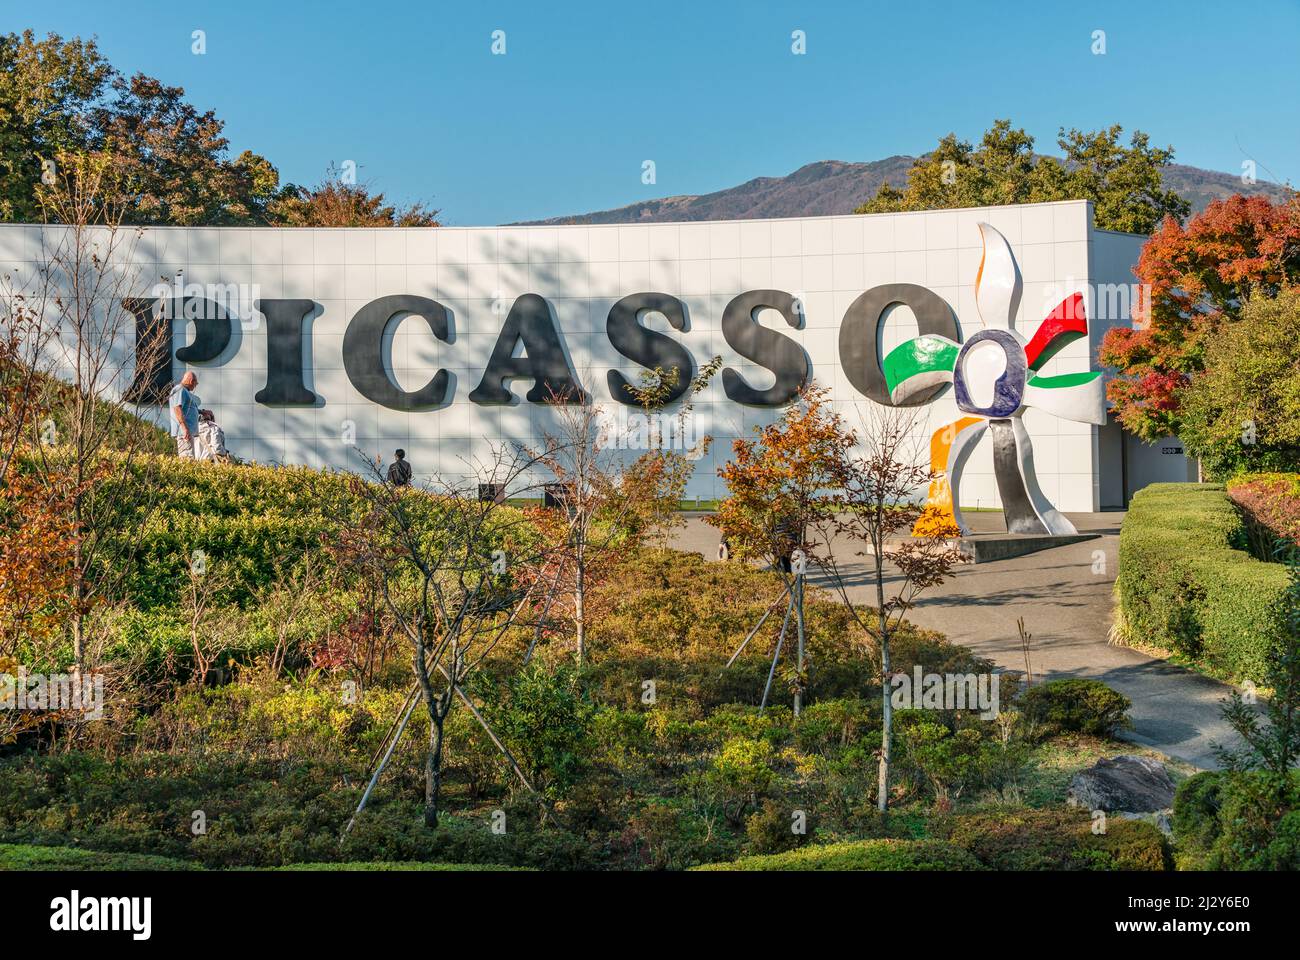 Picasso Pavilion At Hakone Open Air Museum Japan Stock Photo Alamy